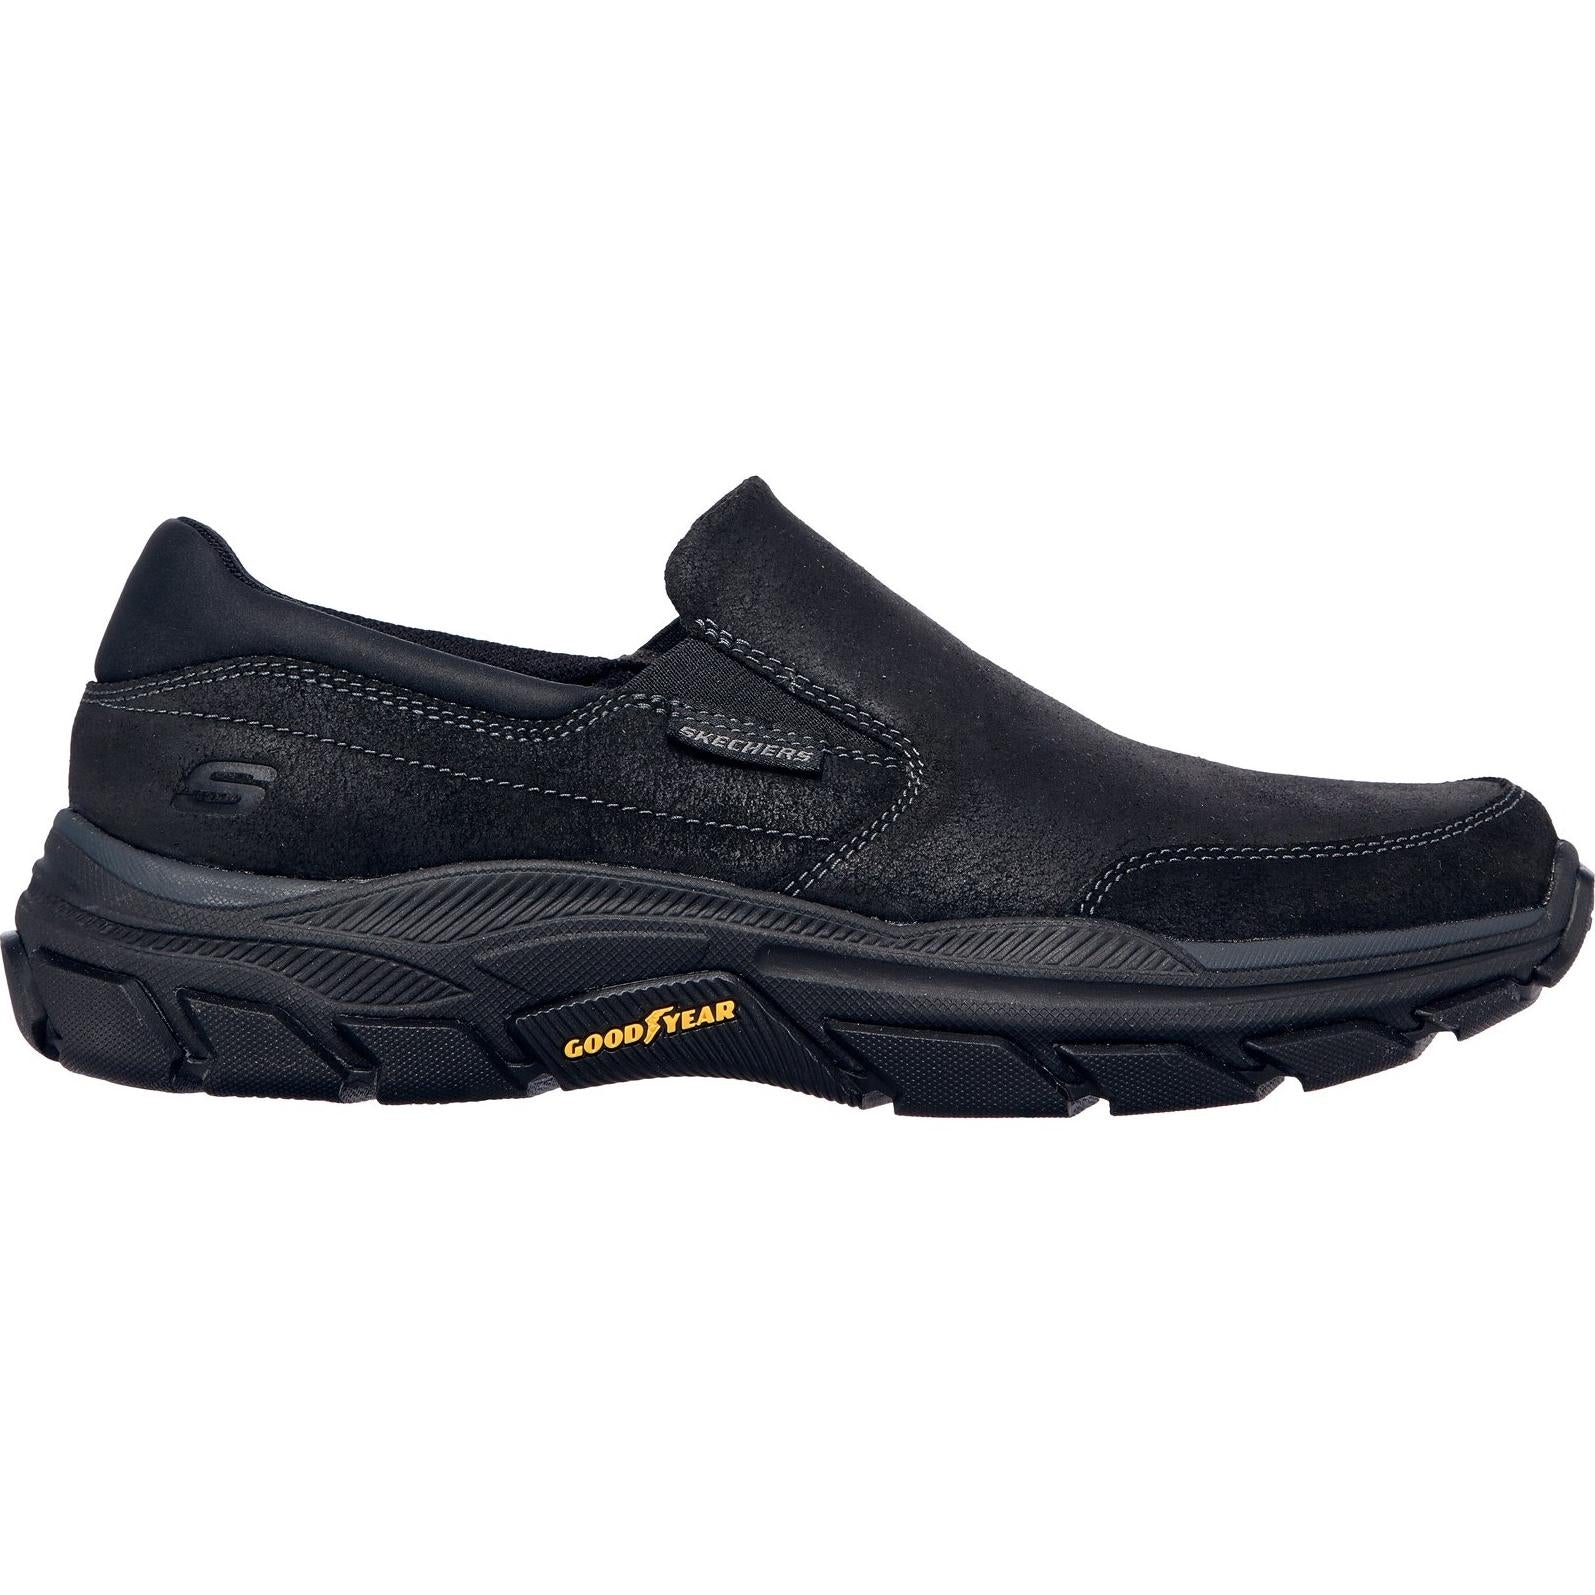 Skechers Relaxed Fit: Respected - Calum Trainer